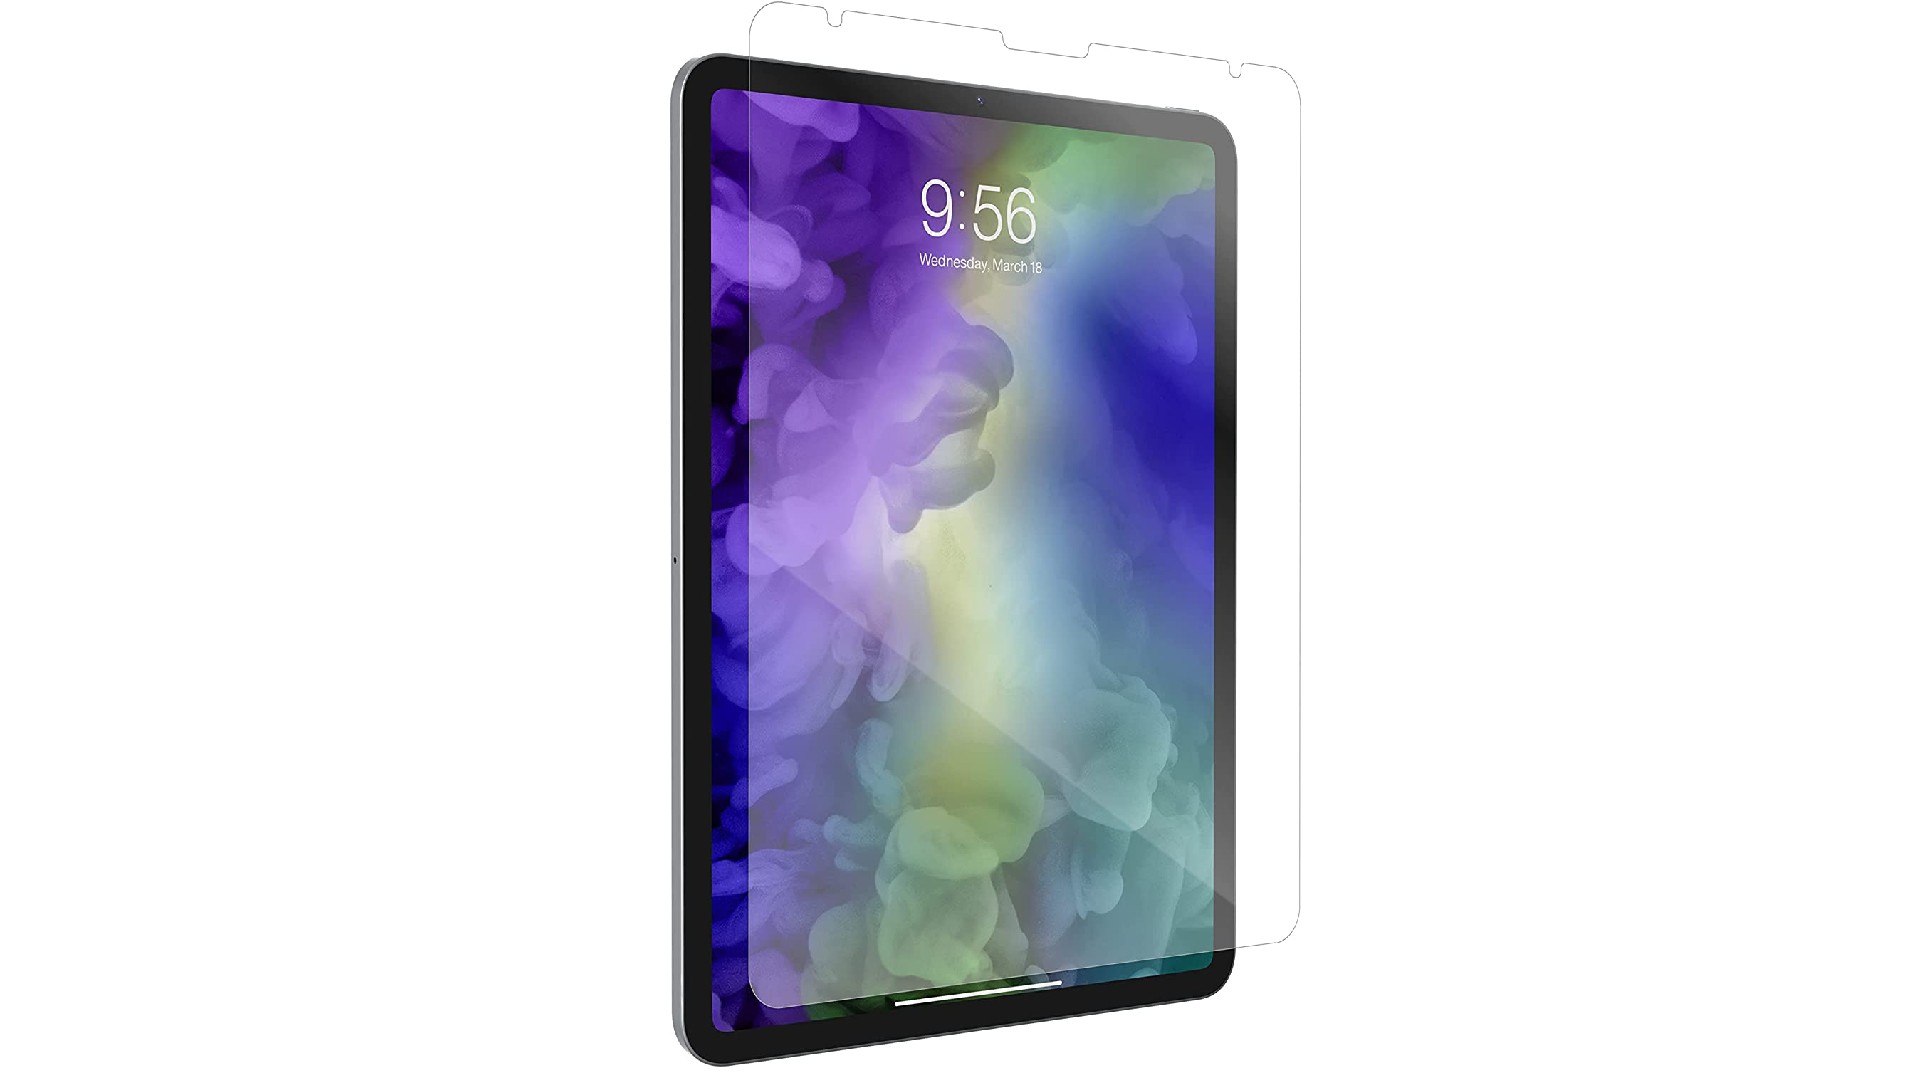 Product shot of ZAGG invisibleSHIELD Glass Plus - Tempered Glass Screen Protector covering an iPad